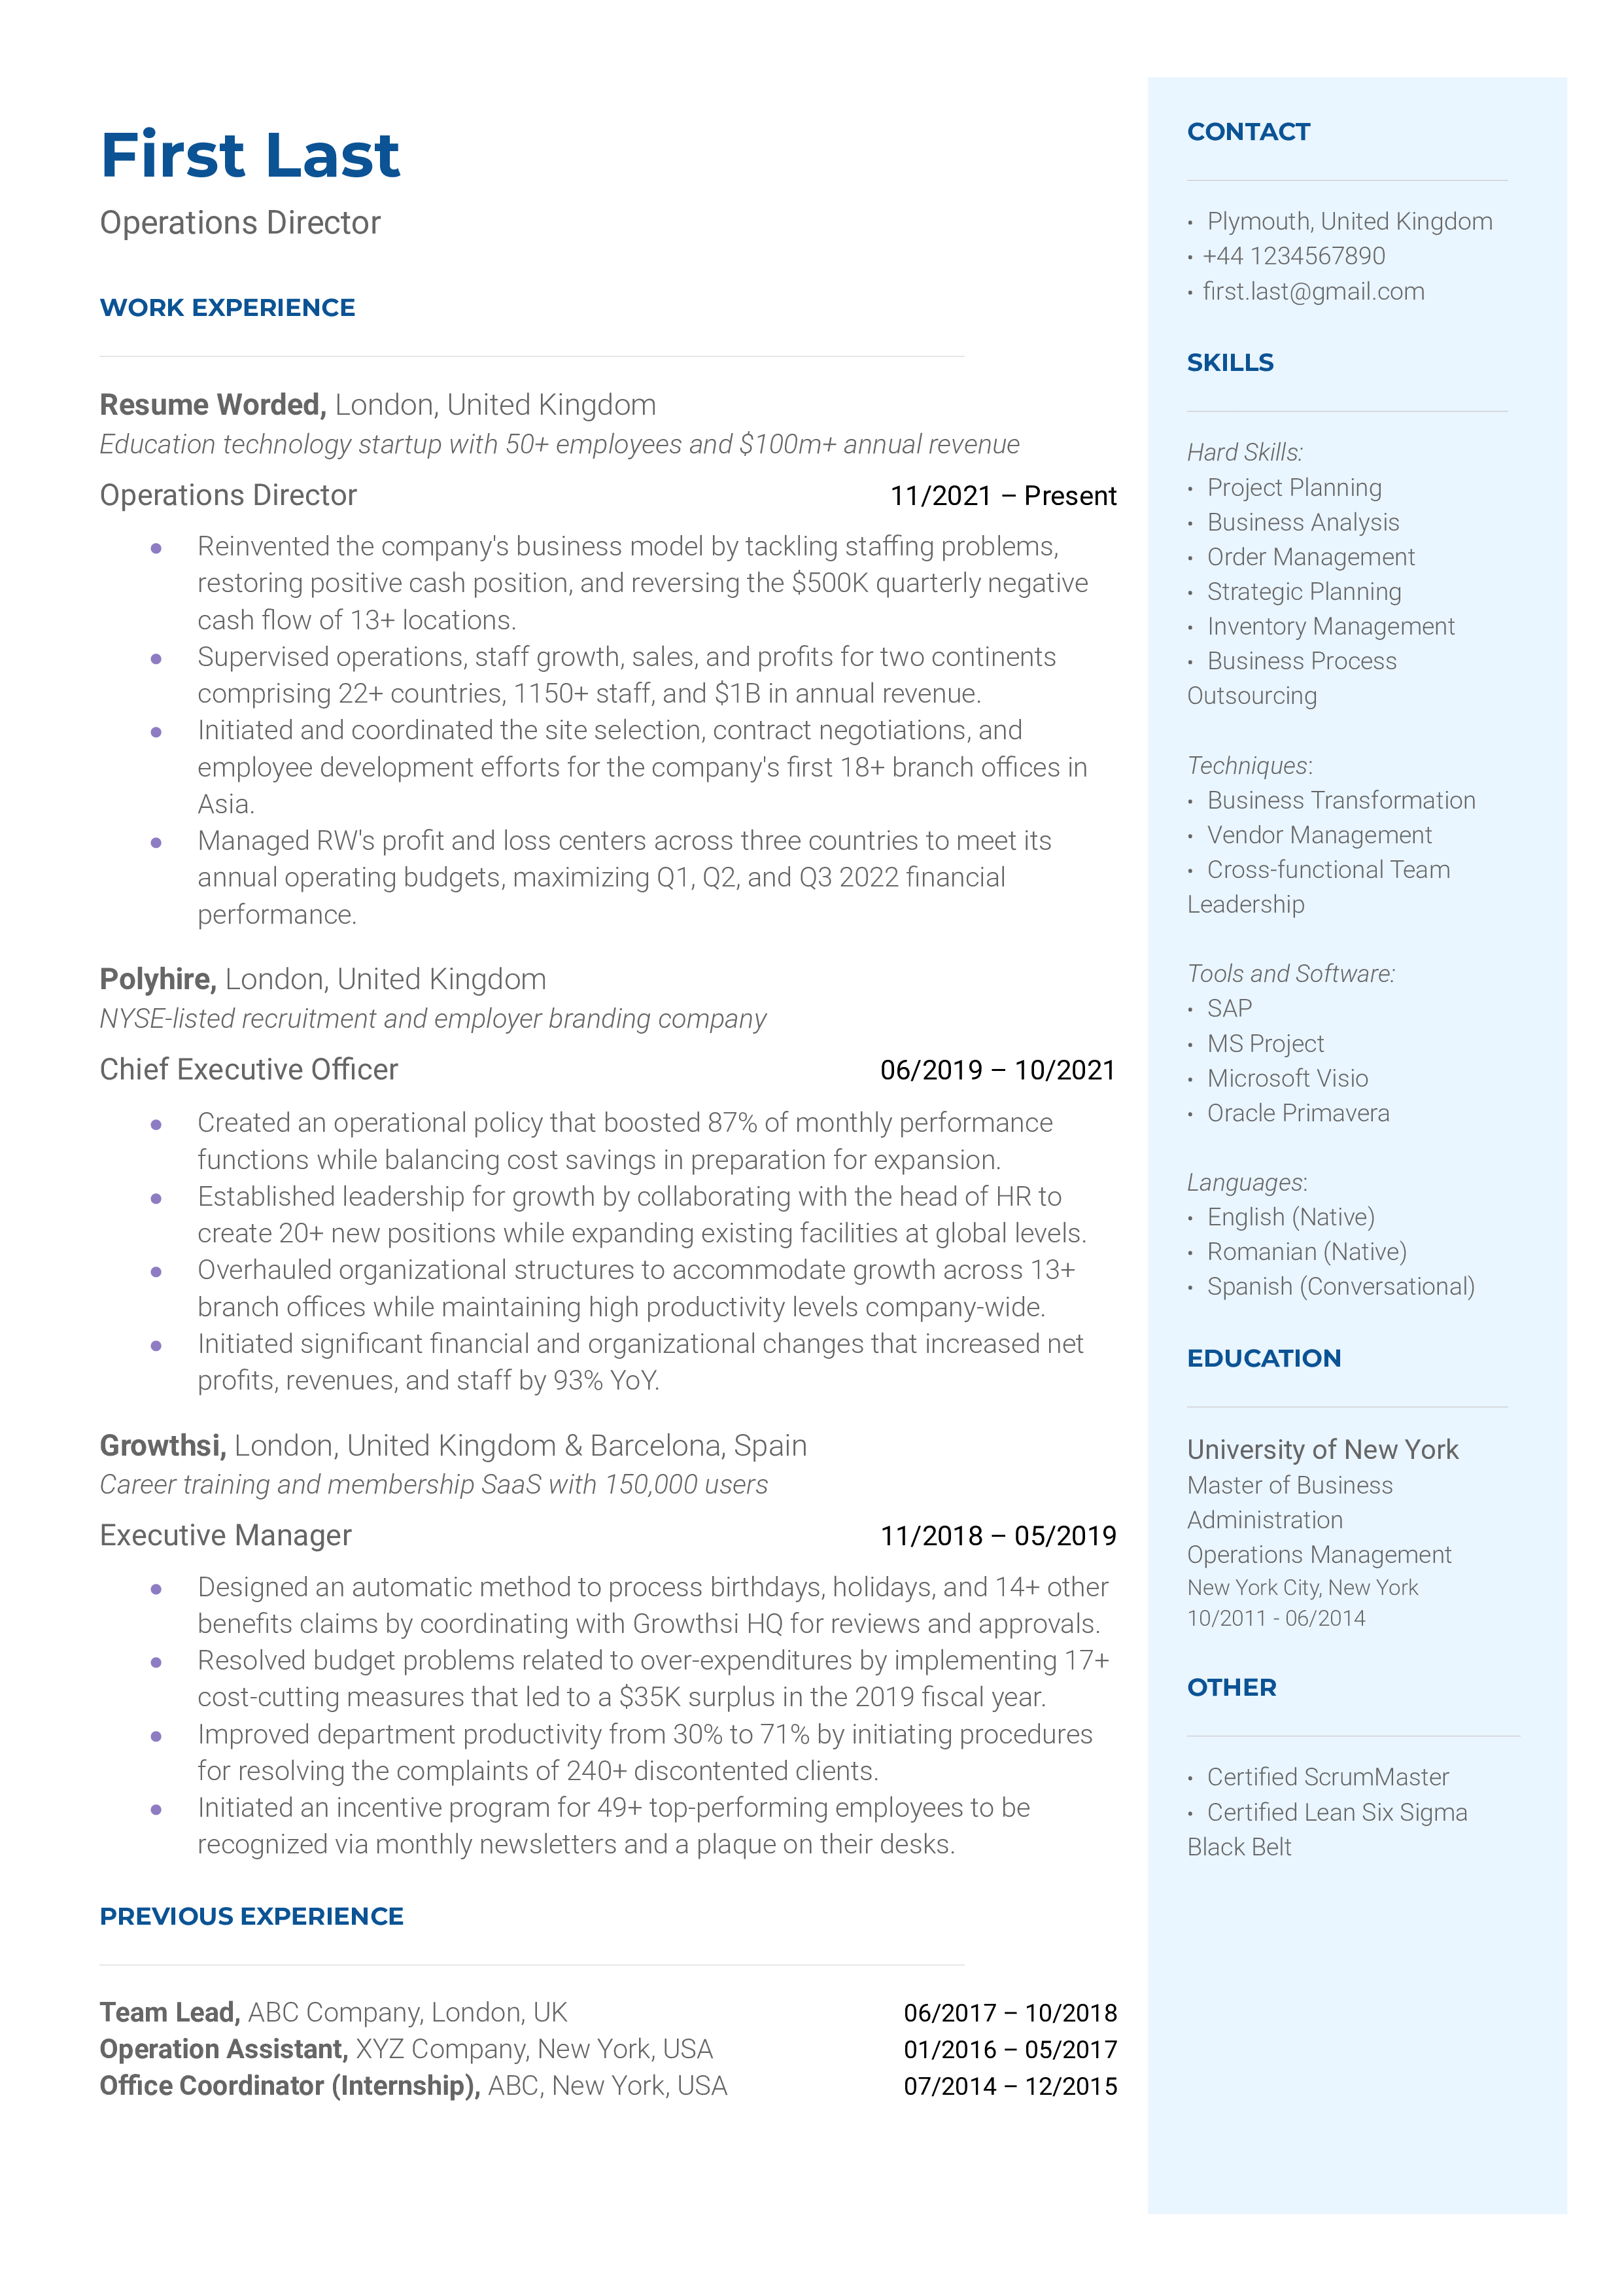 A well-constructed CV for an Operations Director position